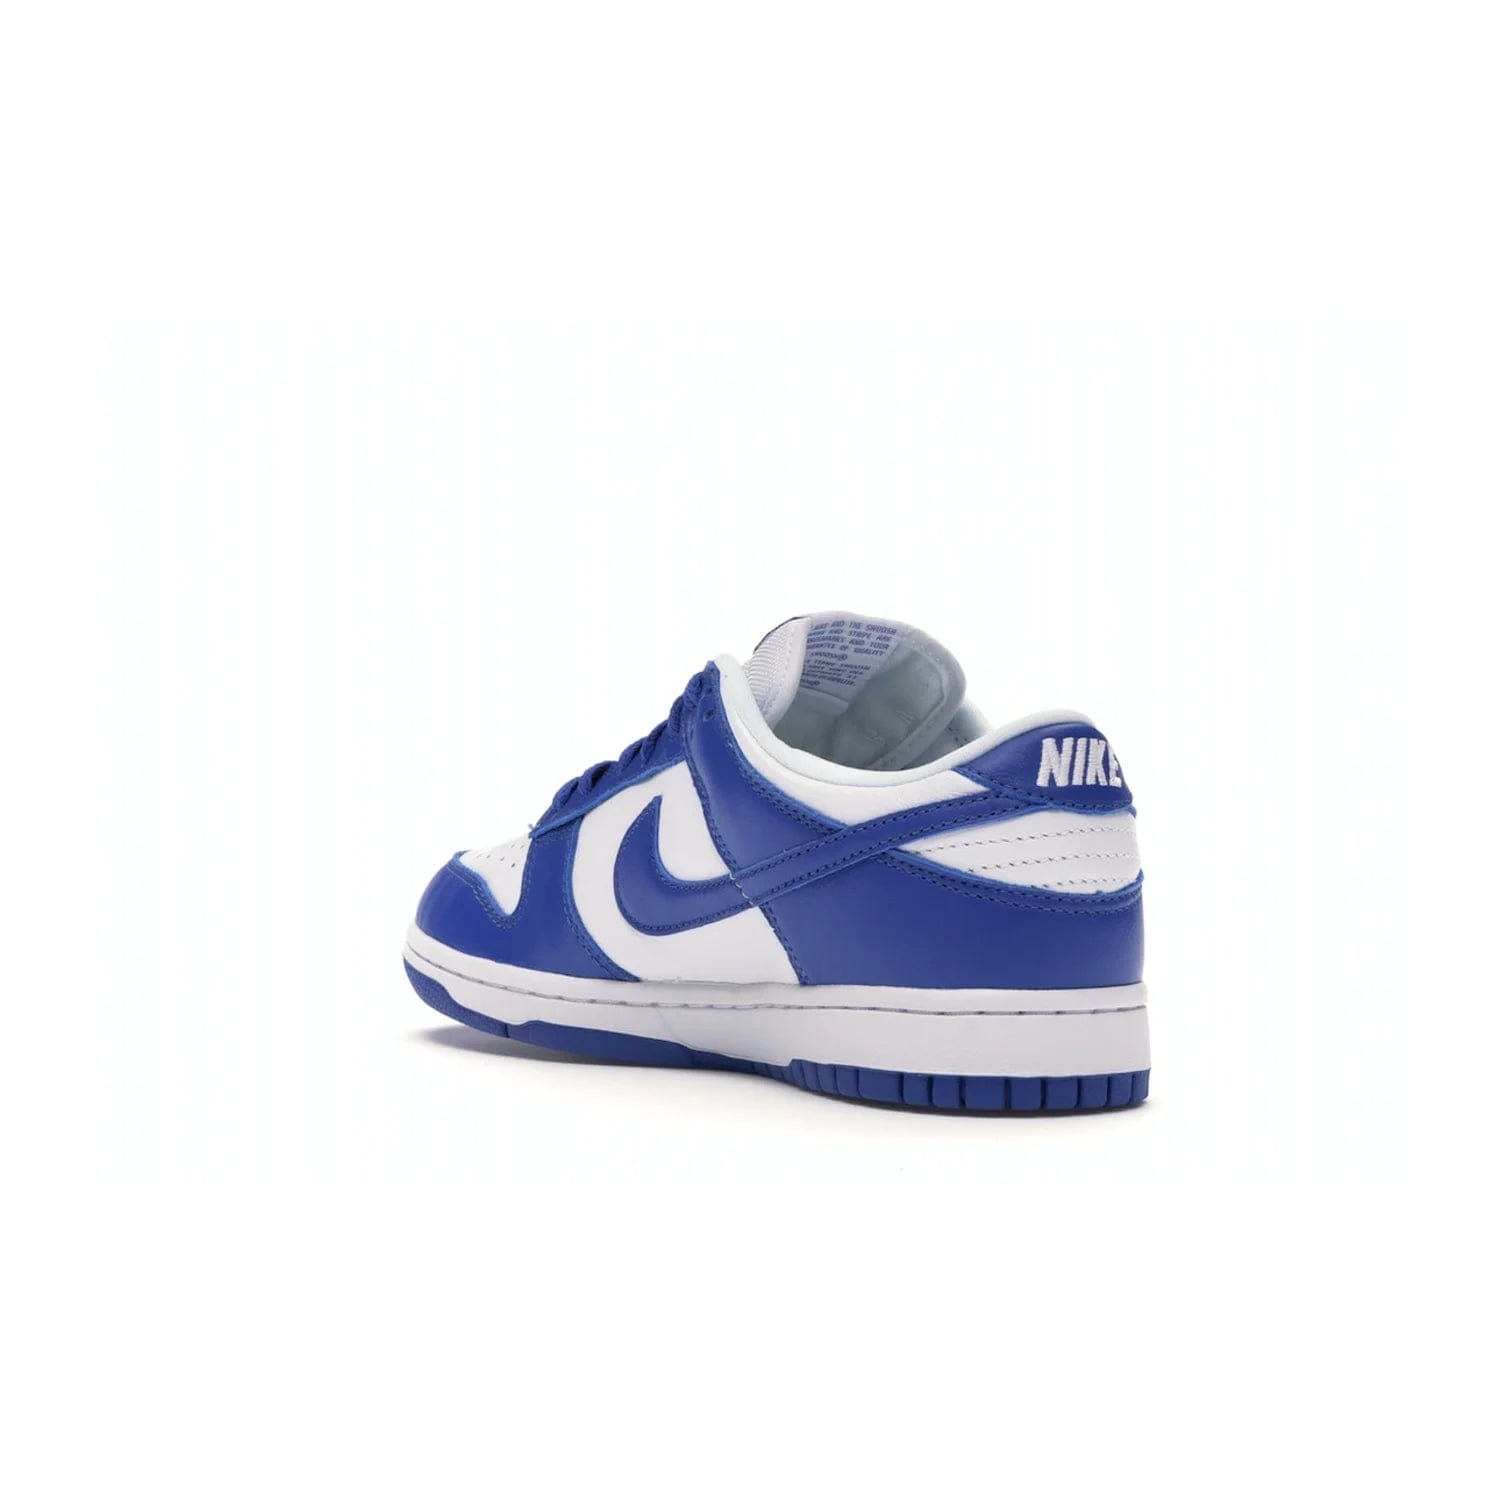 Nike Dunk Low SP Kentucky (2020/2022) - Image 24 - Only at www.BallersClubKickz.com - Classic Nike Dunk Low SP Kentucky with timeless White/Varsity Royal colorway. White leather upper, royal outsole, and Nike branding. A hit since March 2020 homage to the 1985 Nike College Colors program. Show your support with these classic kicks.